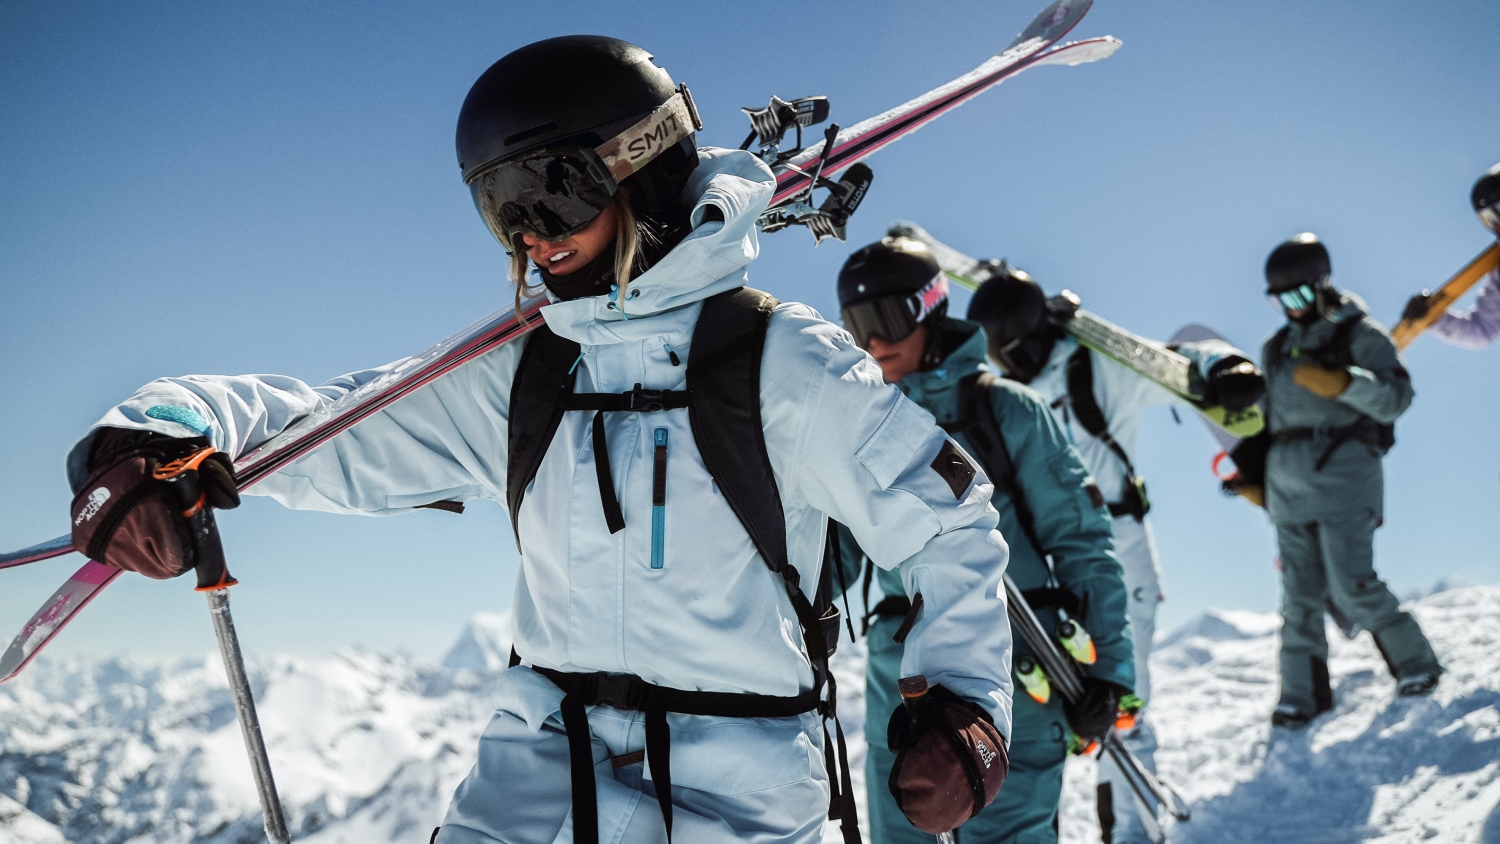 OOSC's New Ski Outerwear Range: Combining Eco-Friendly Fashion with  Top-Tier Performance - Snow Magazine